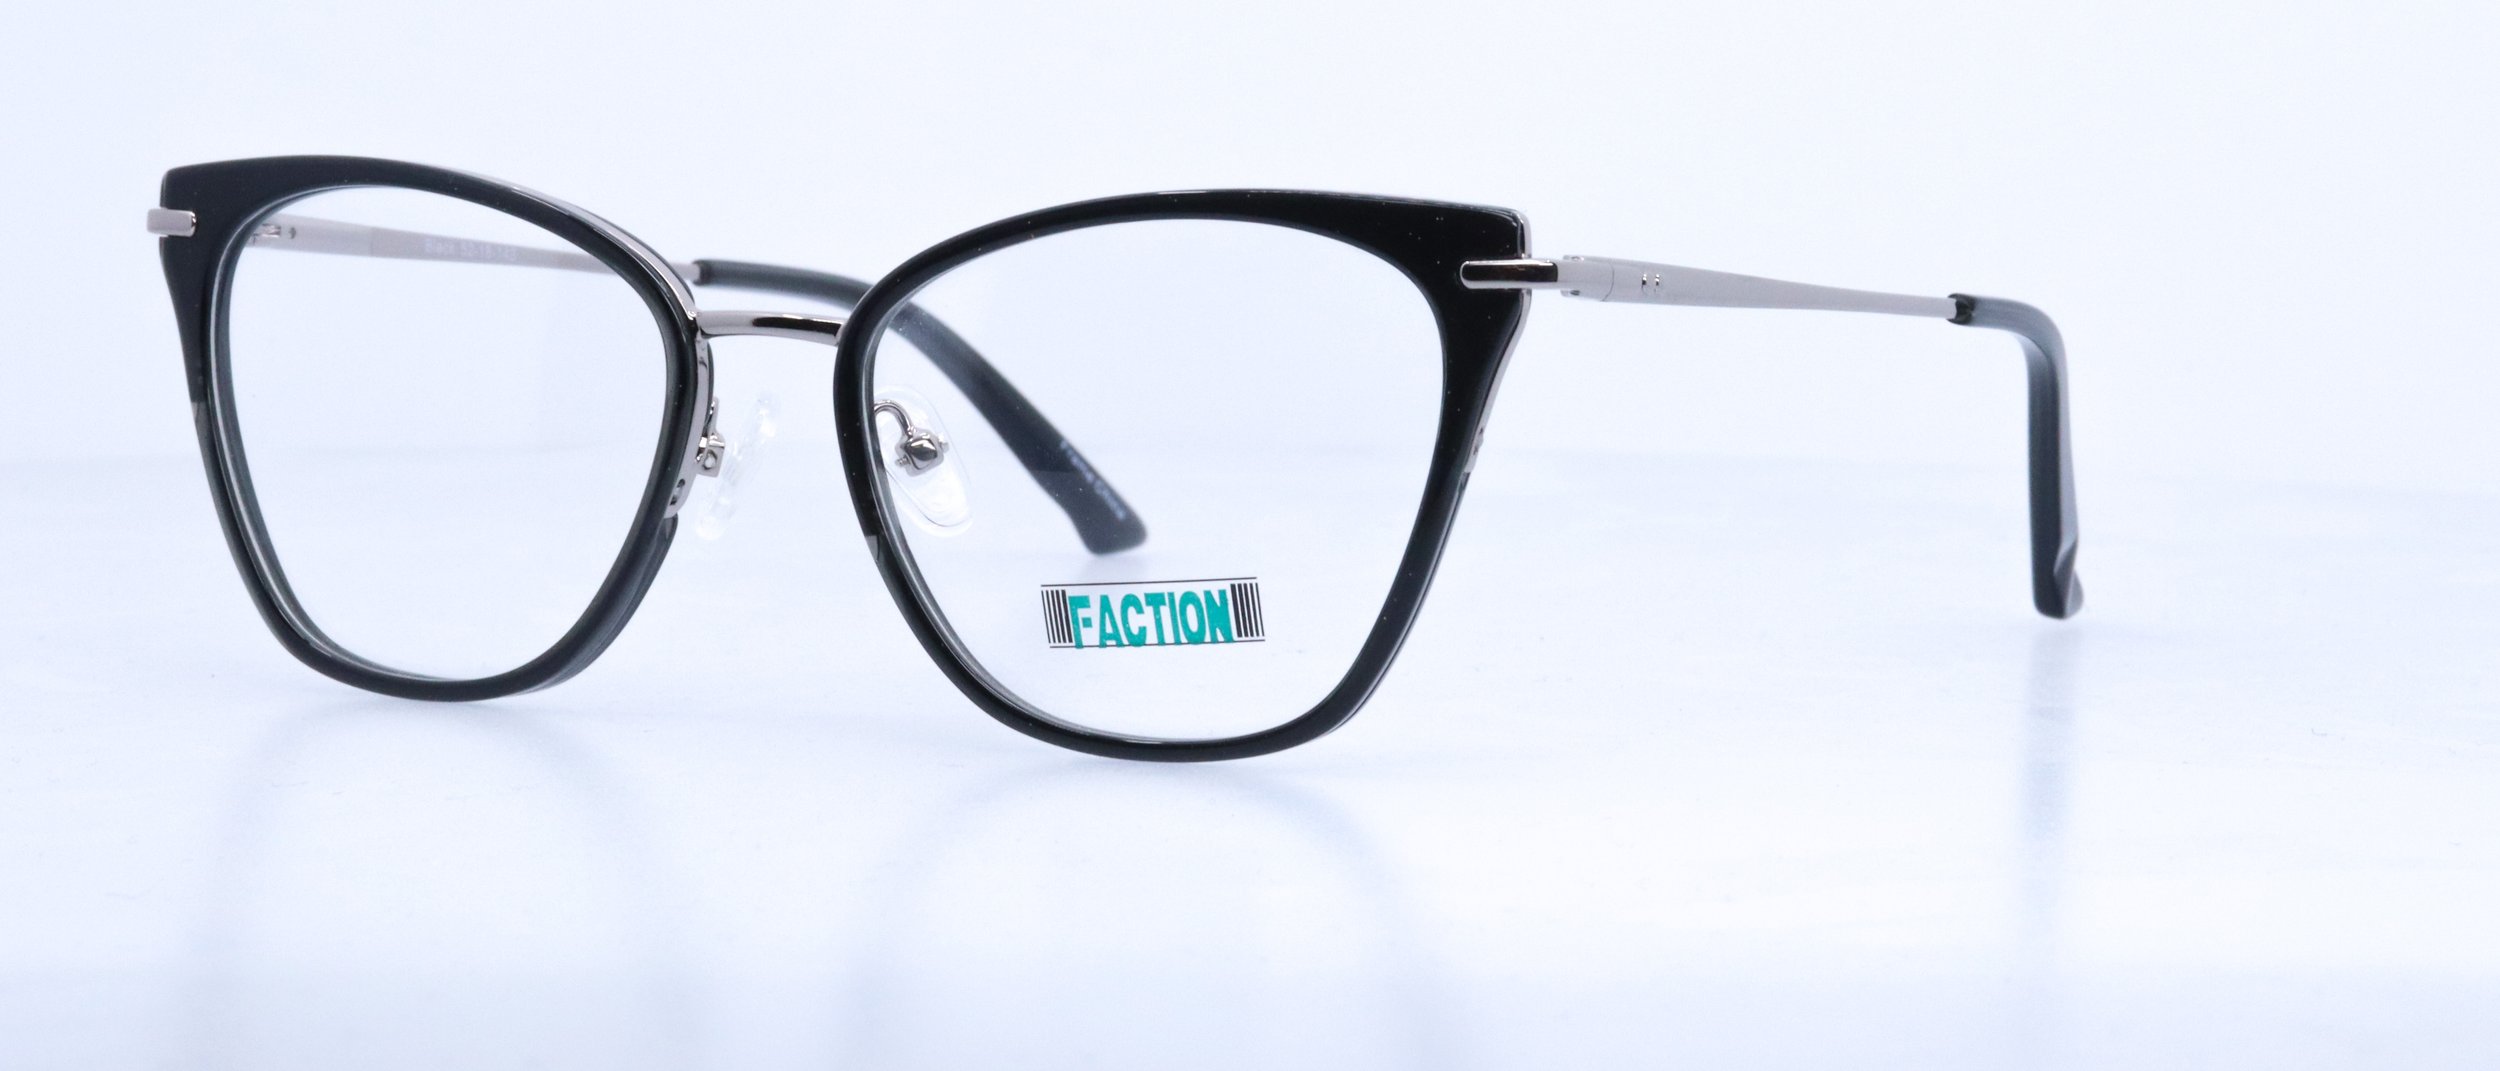  FN905: 52-18-143, Available in Black or Green 